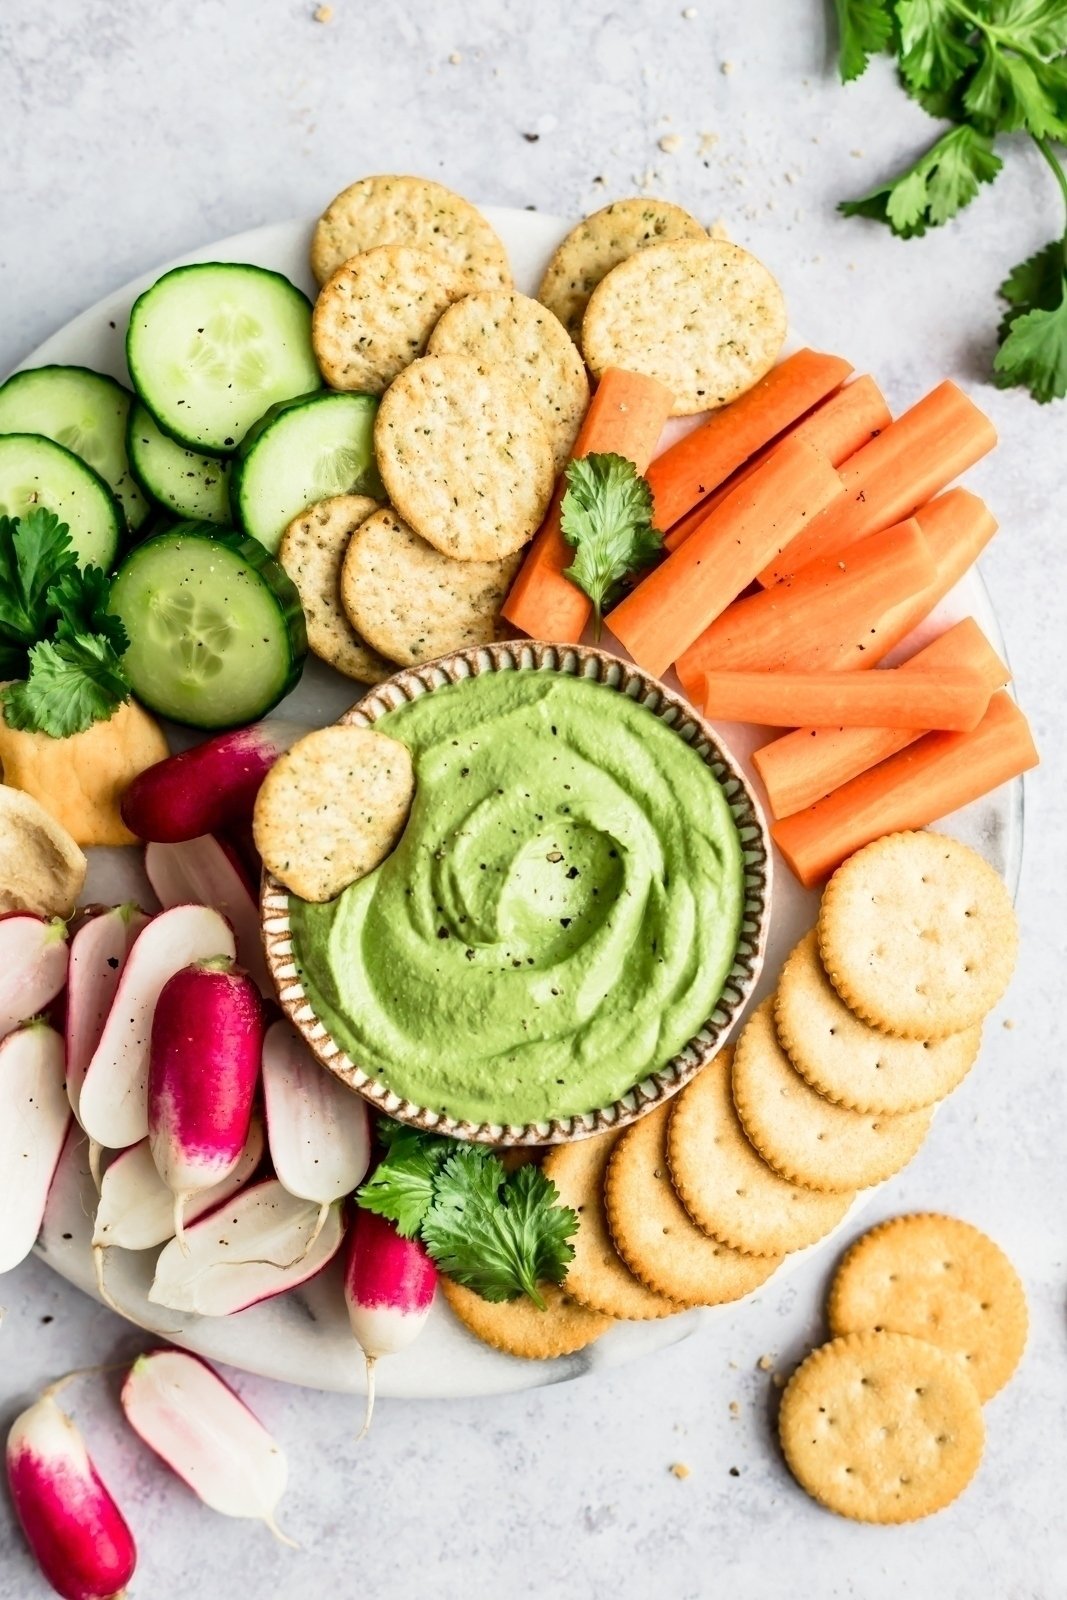 vegan green cashew dip on a platter with veggies and crackers